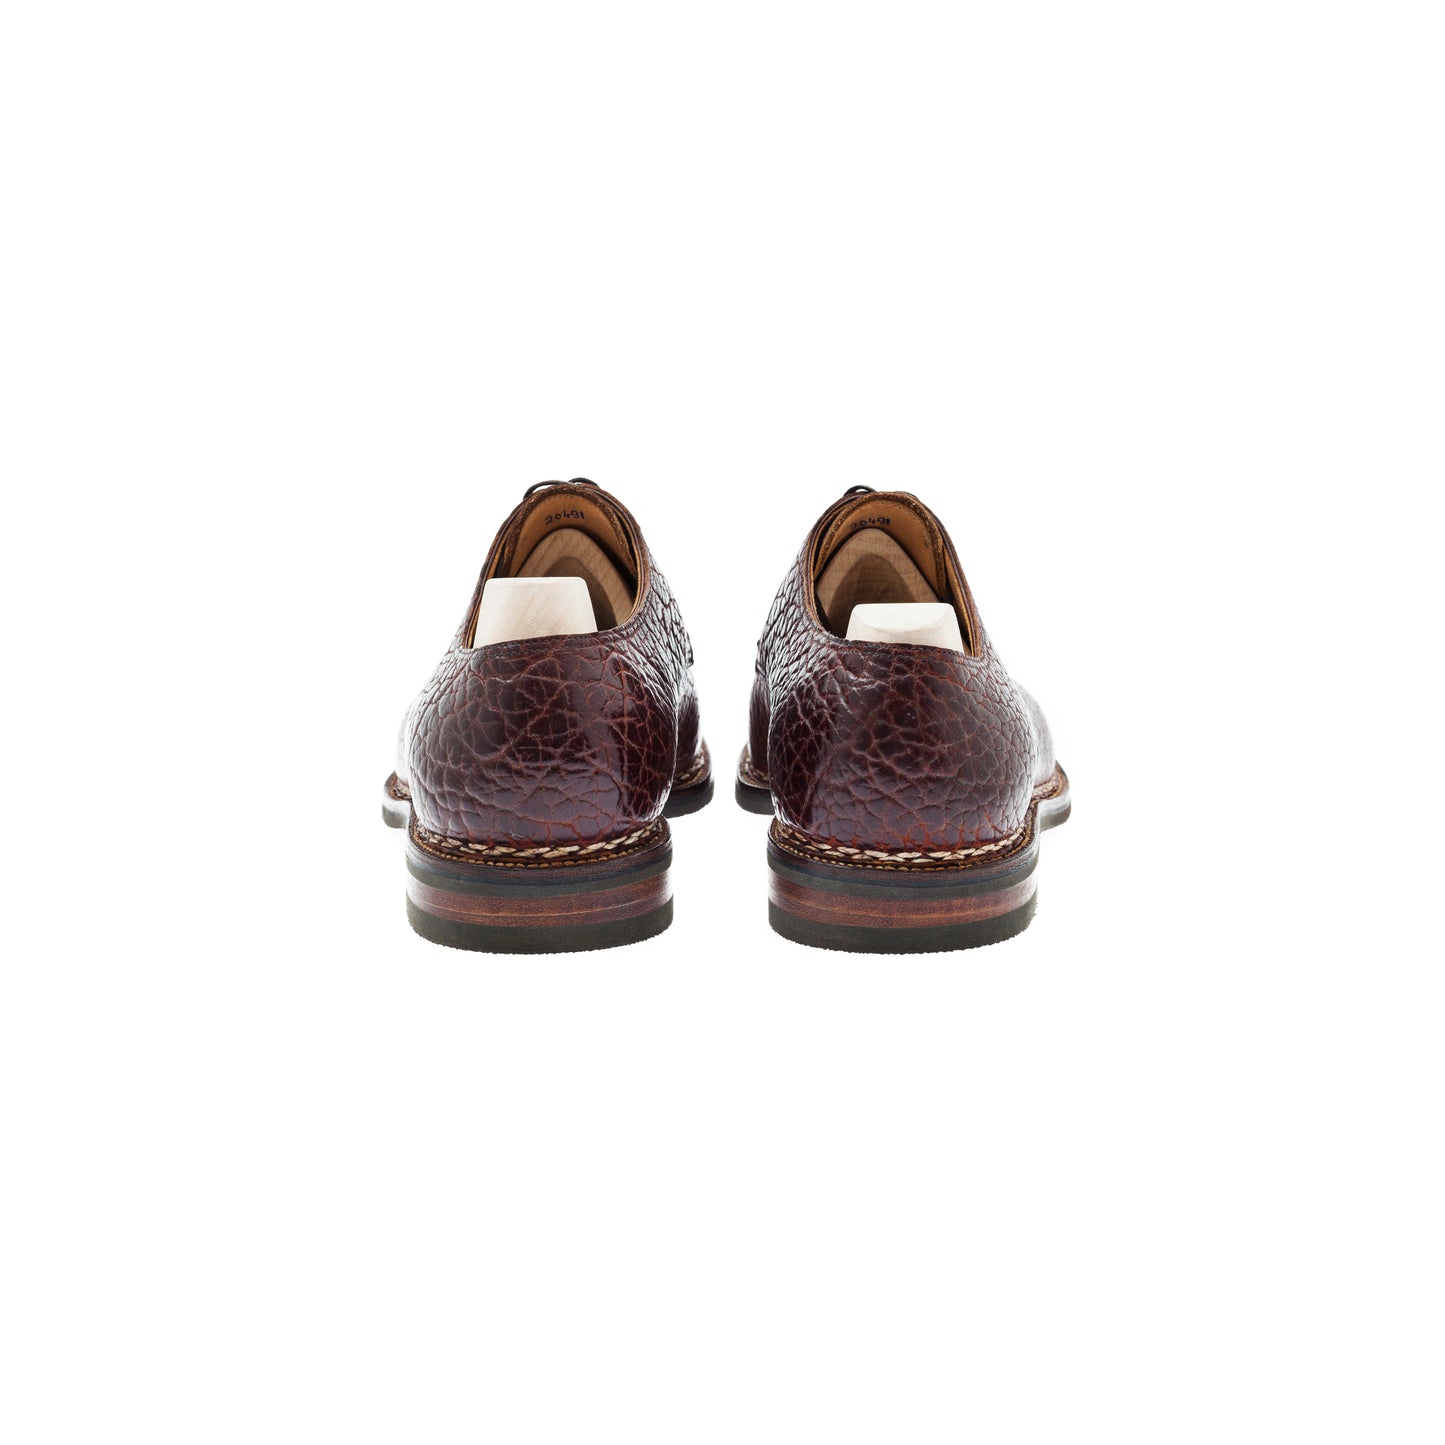 Three eyelet French Norwegian Derby in Tabaccho Bison leather